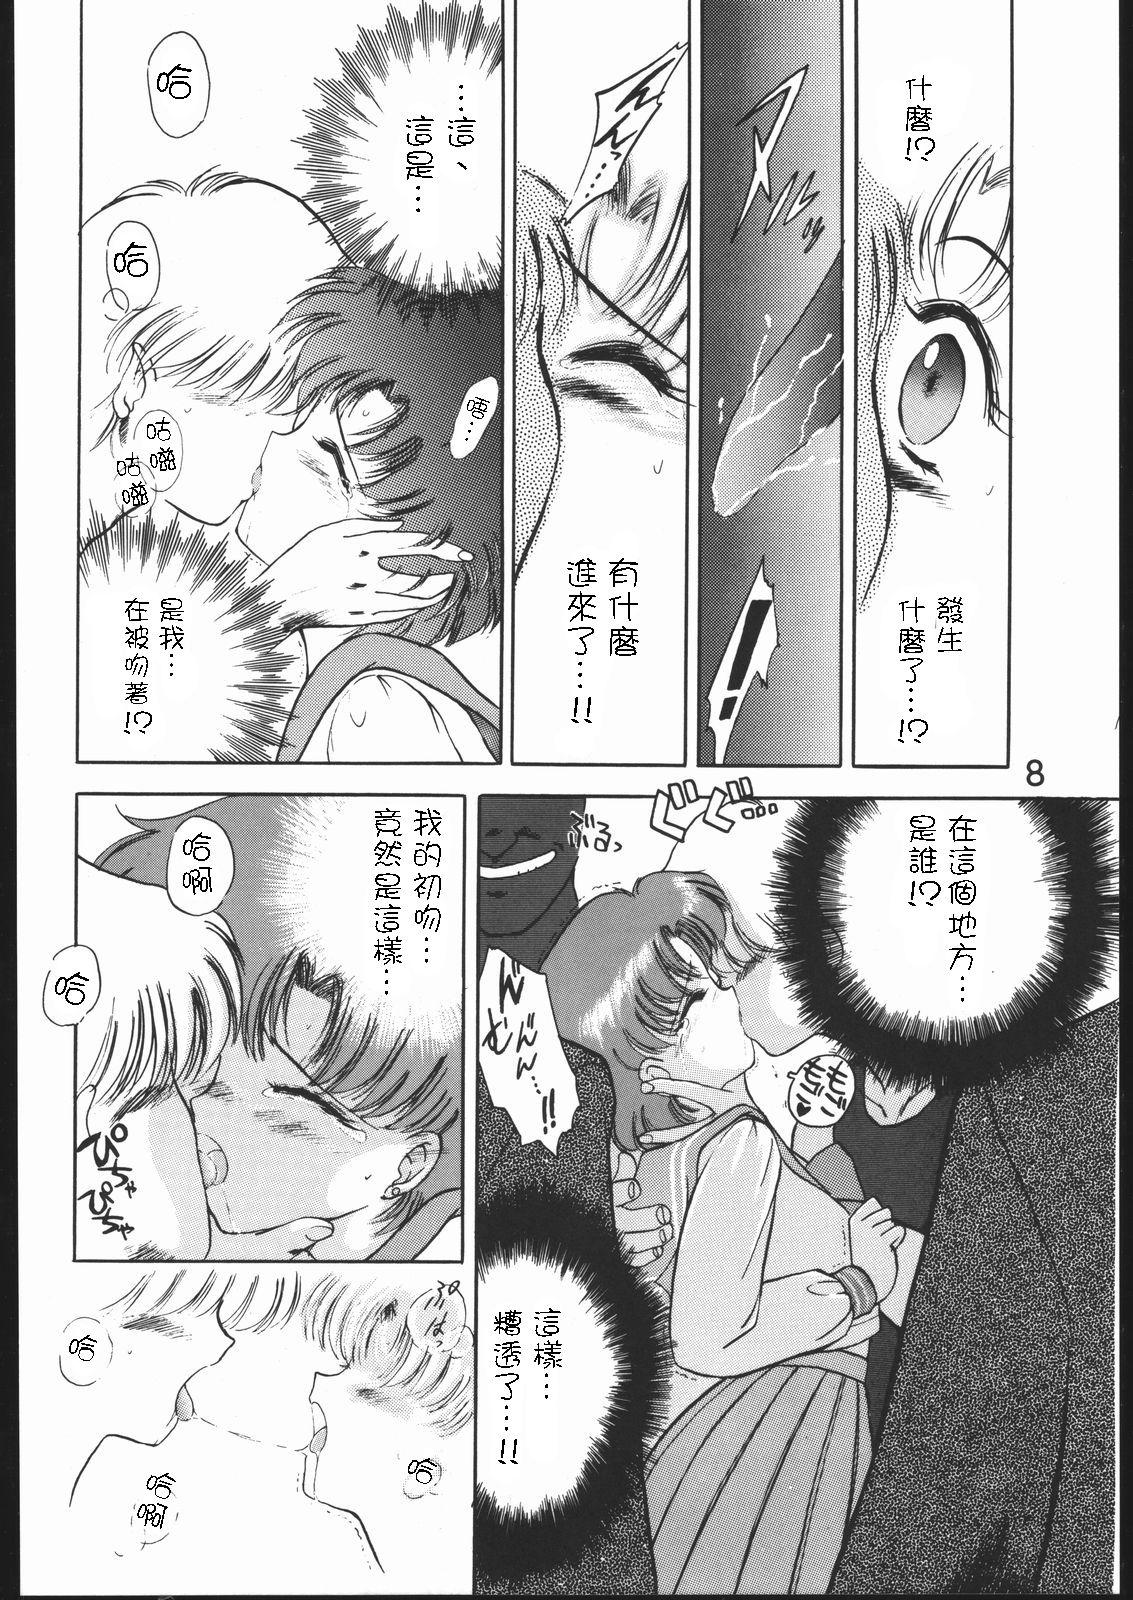 Muscular SUBMISSION MERCURY PLUS - Sailor moon 1080p - Page 8